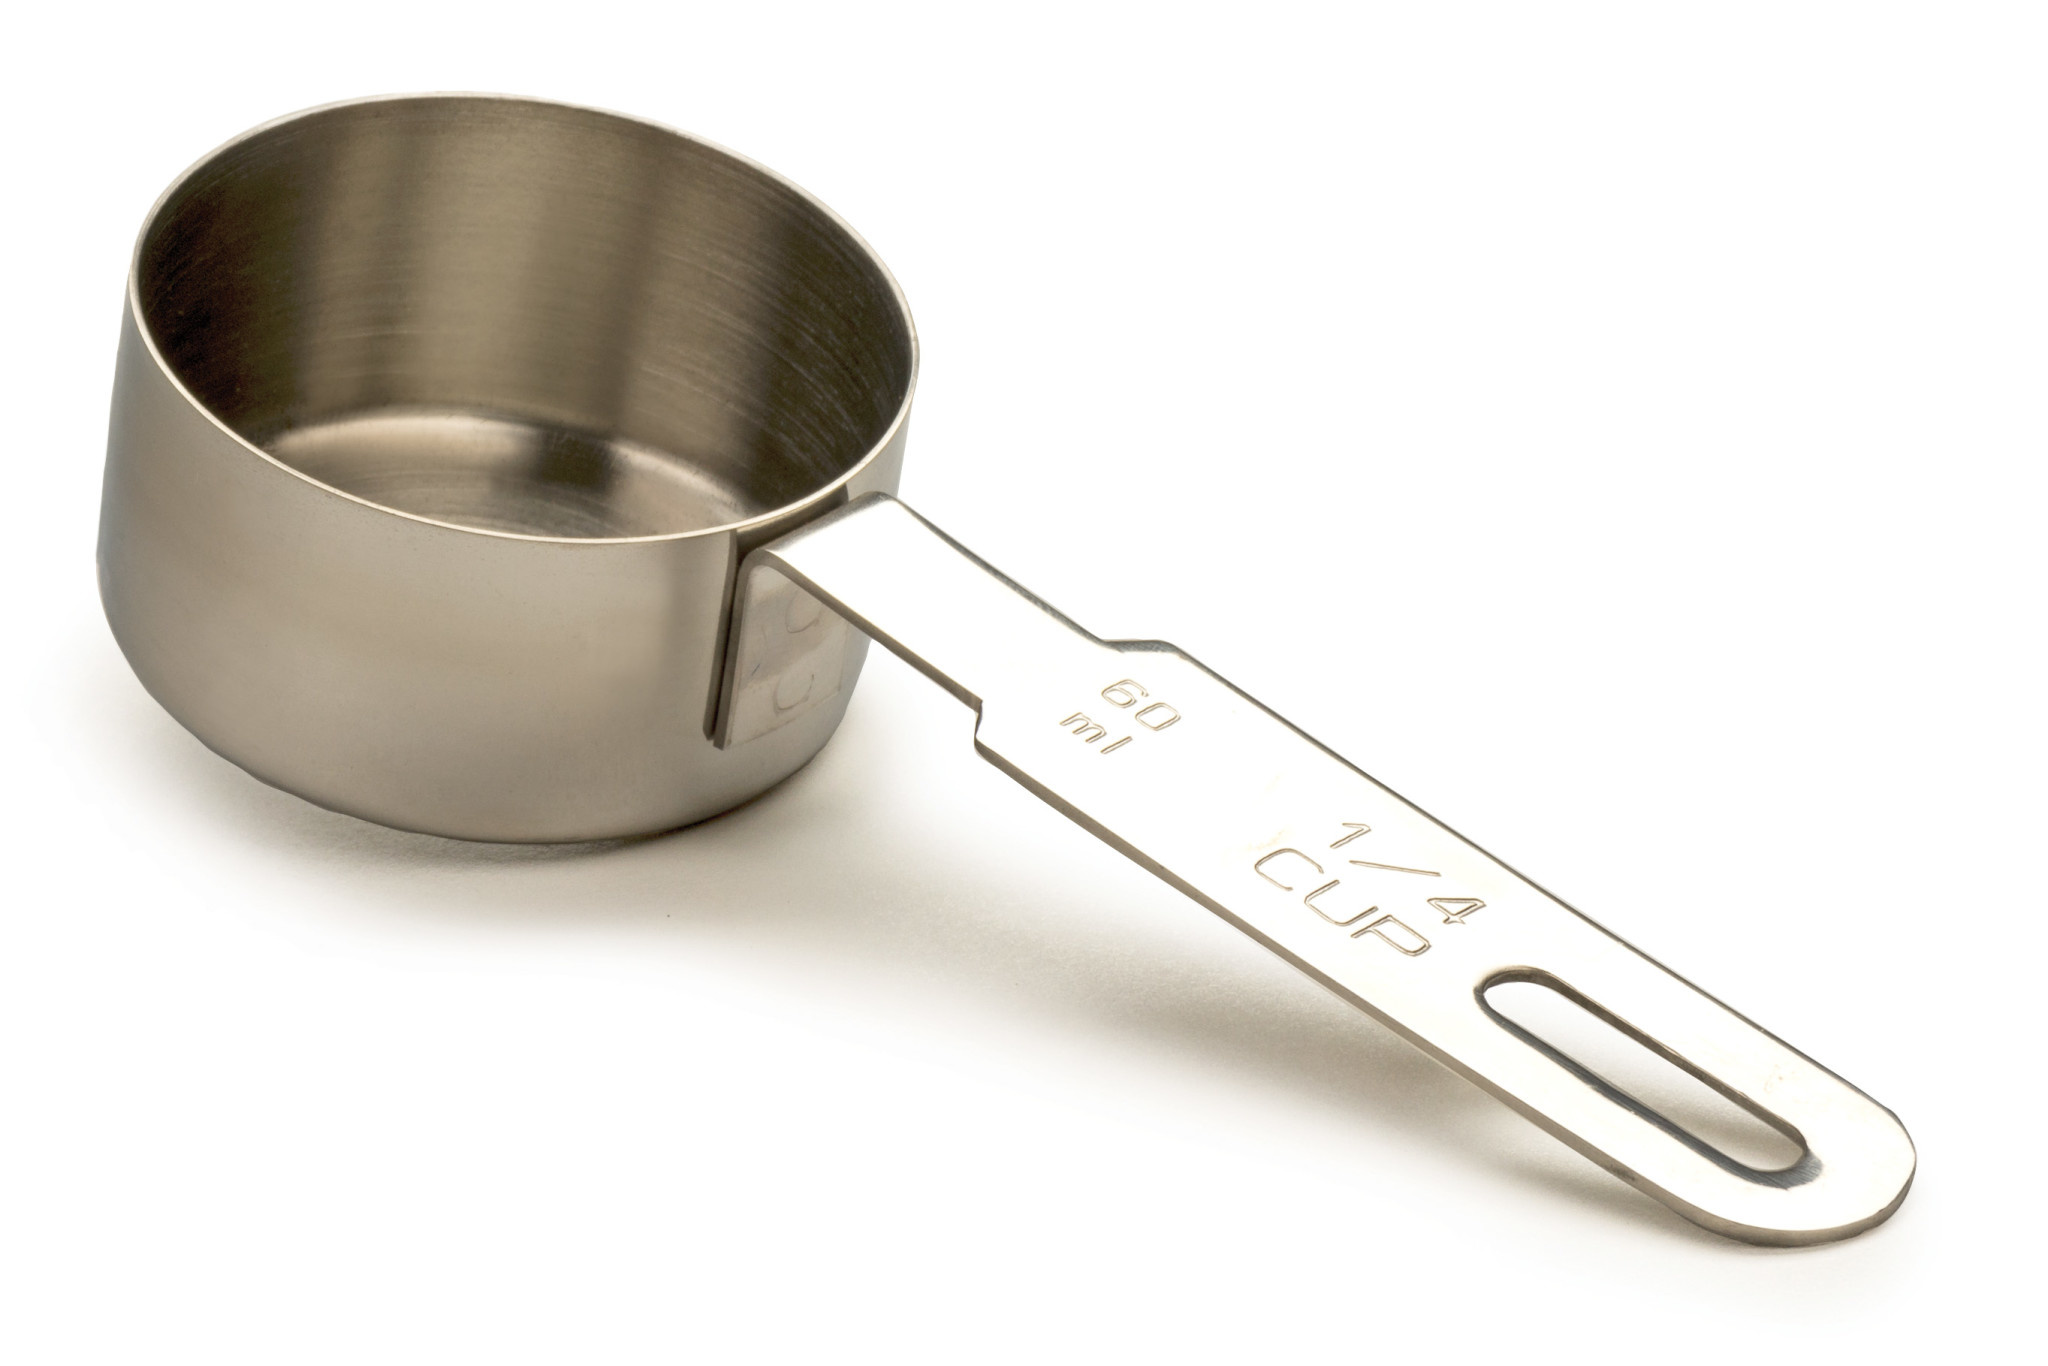 Endurance Stainless Steel 1/4 Cup Measuring Cup